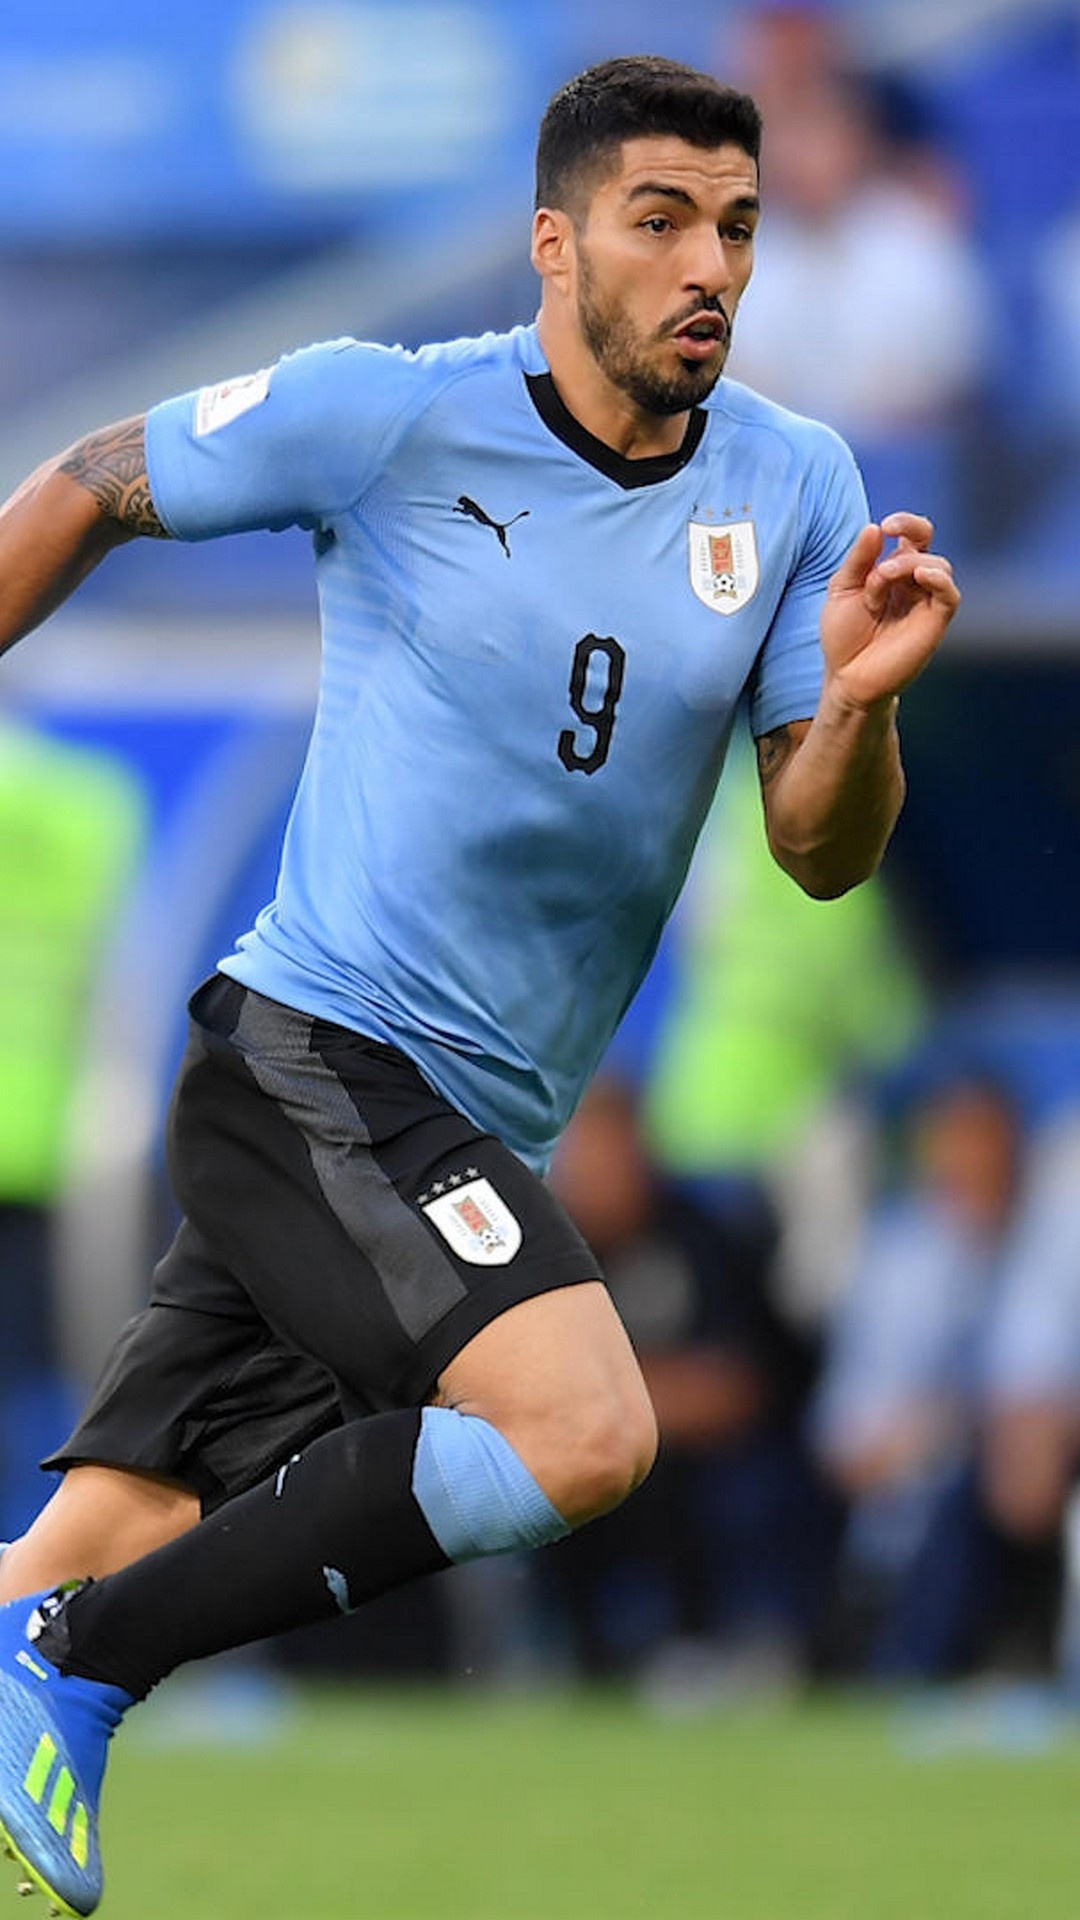 Luis Suarez, Wallpaper for Android, Uruguayan footballer, Mobile background, 1080x1920 Full HD Phone